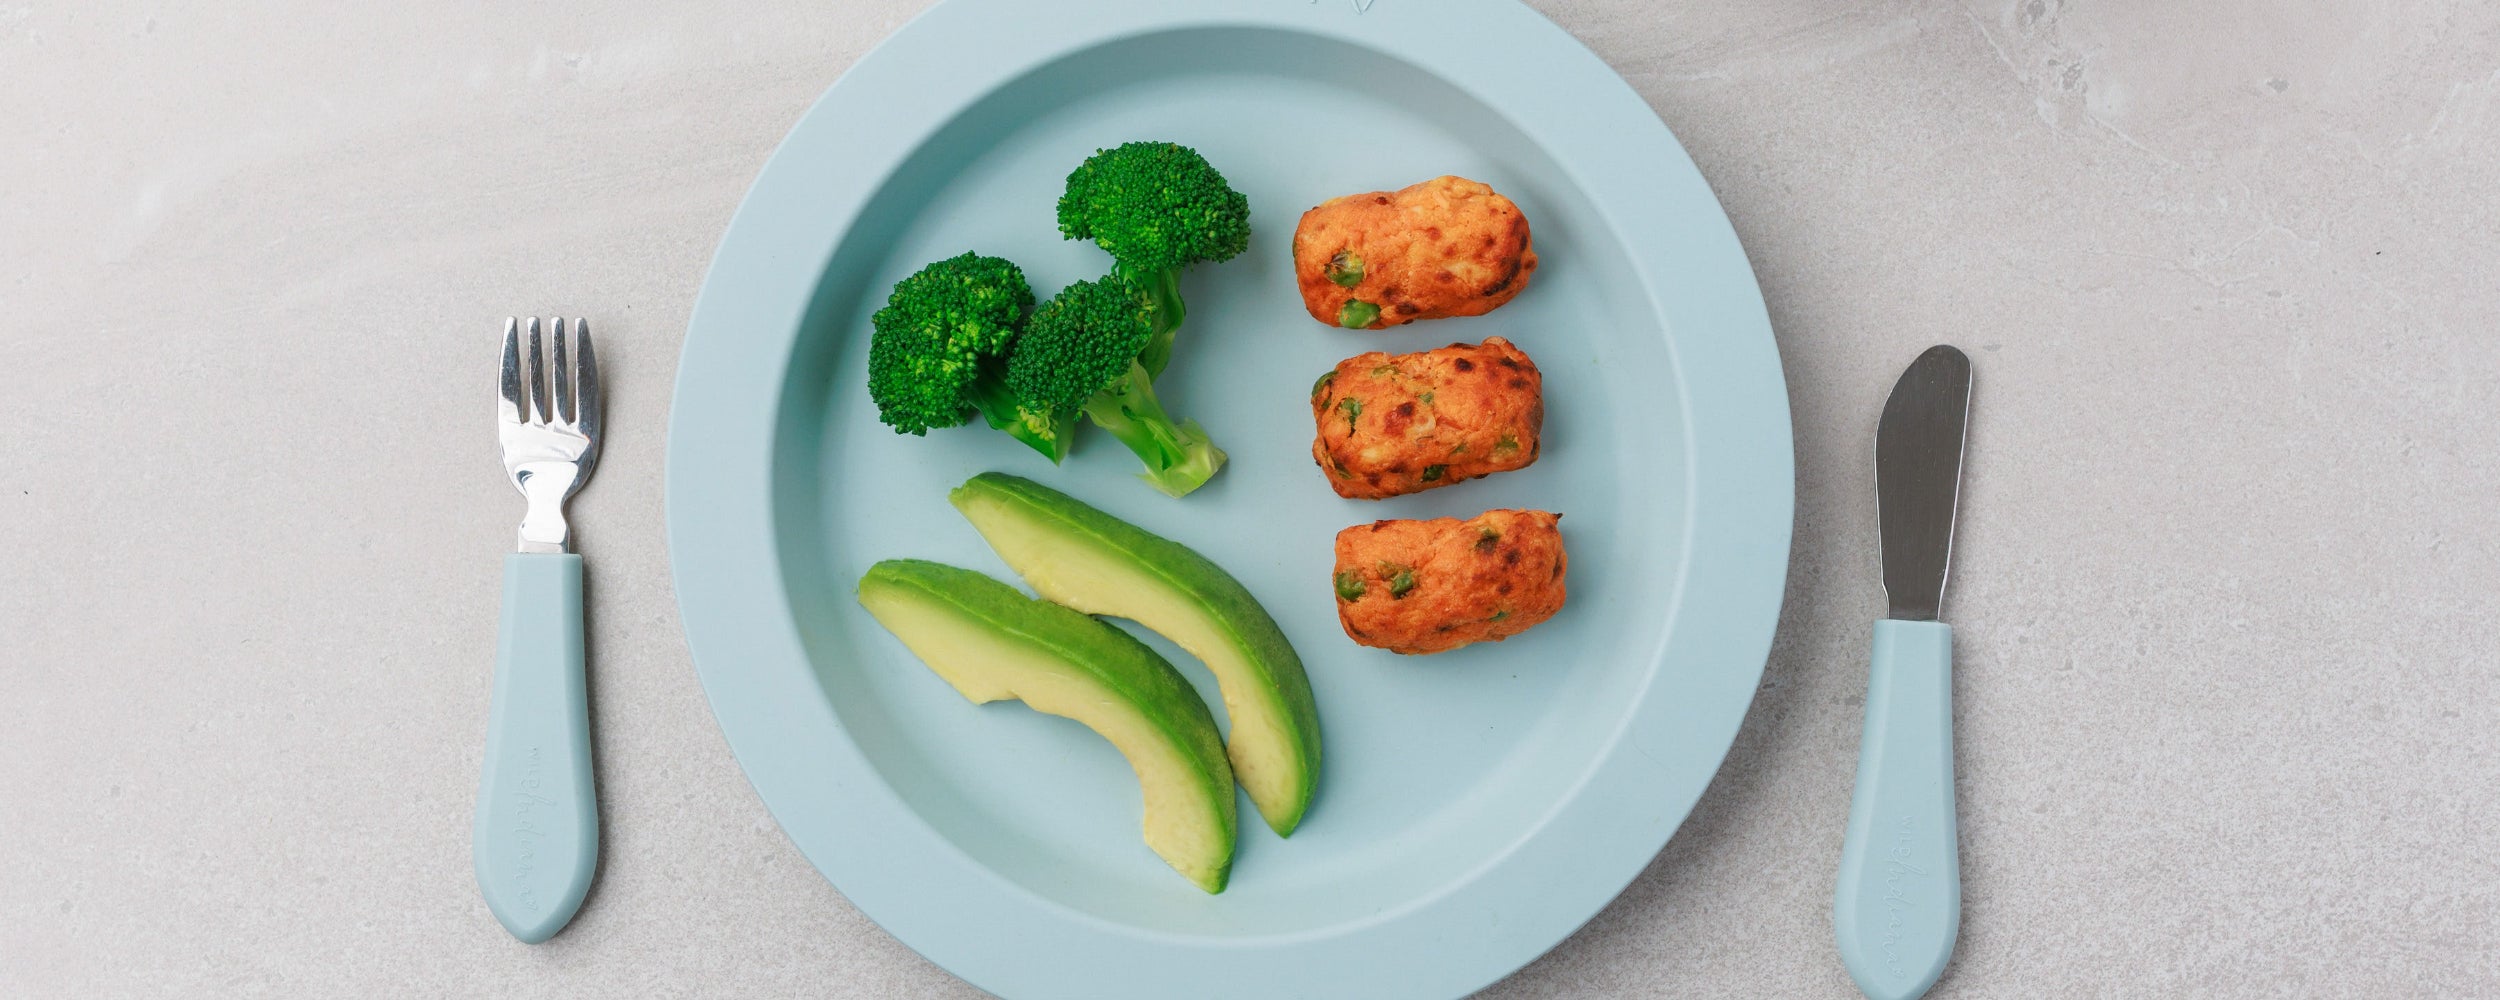 A plate of Sweet Potato Salmon Bites from Audrey & Alfie's Finger Food Range, with Veggie Sides